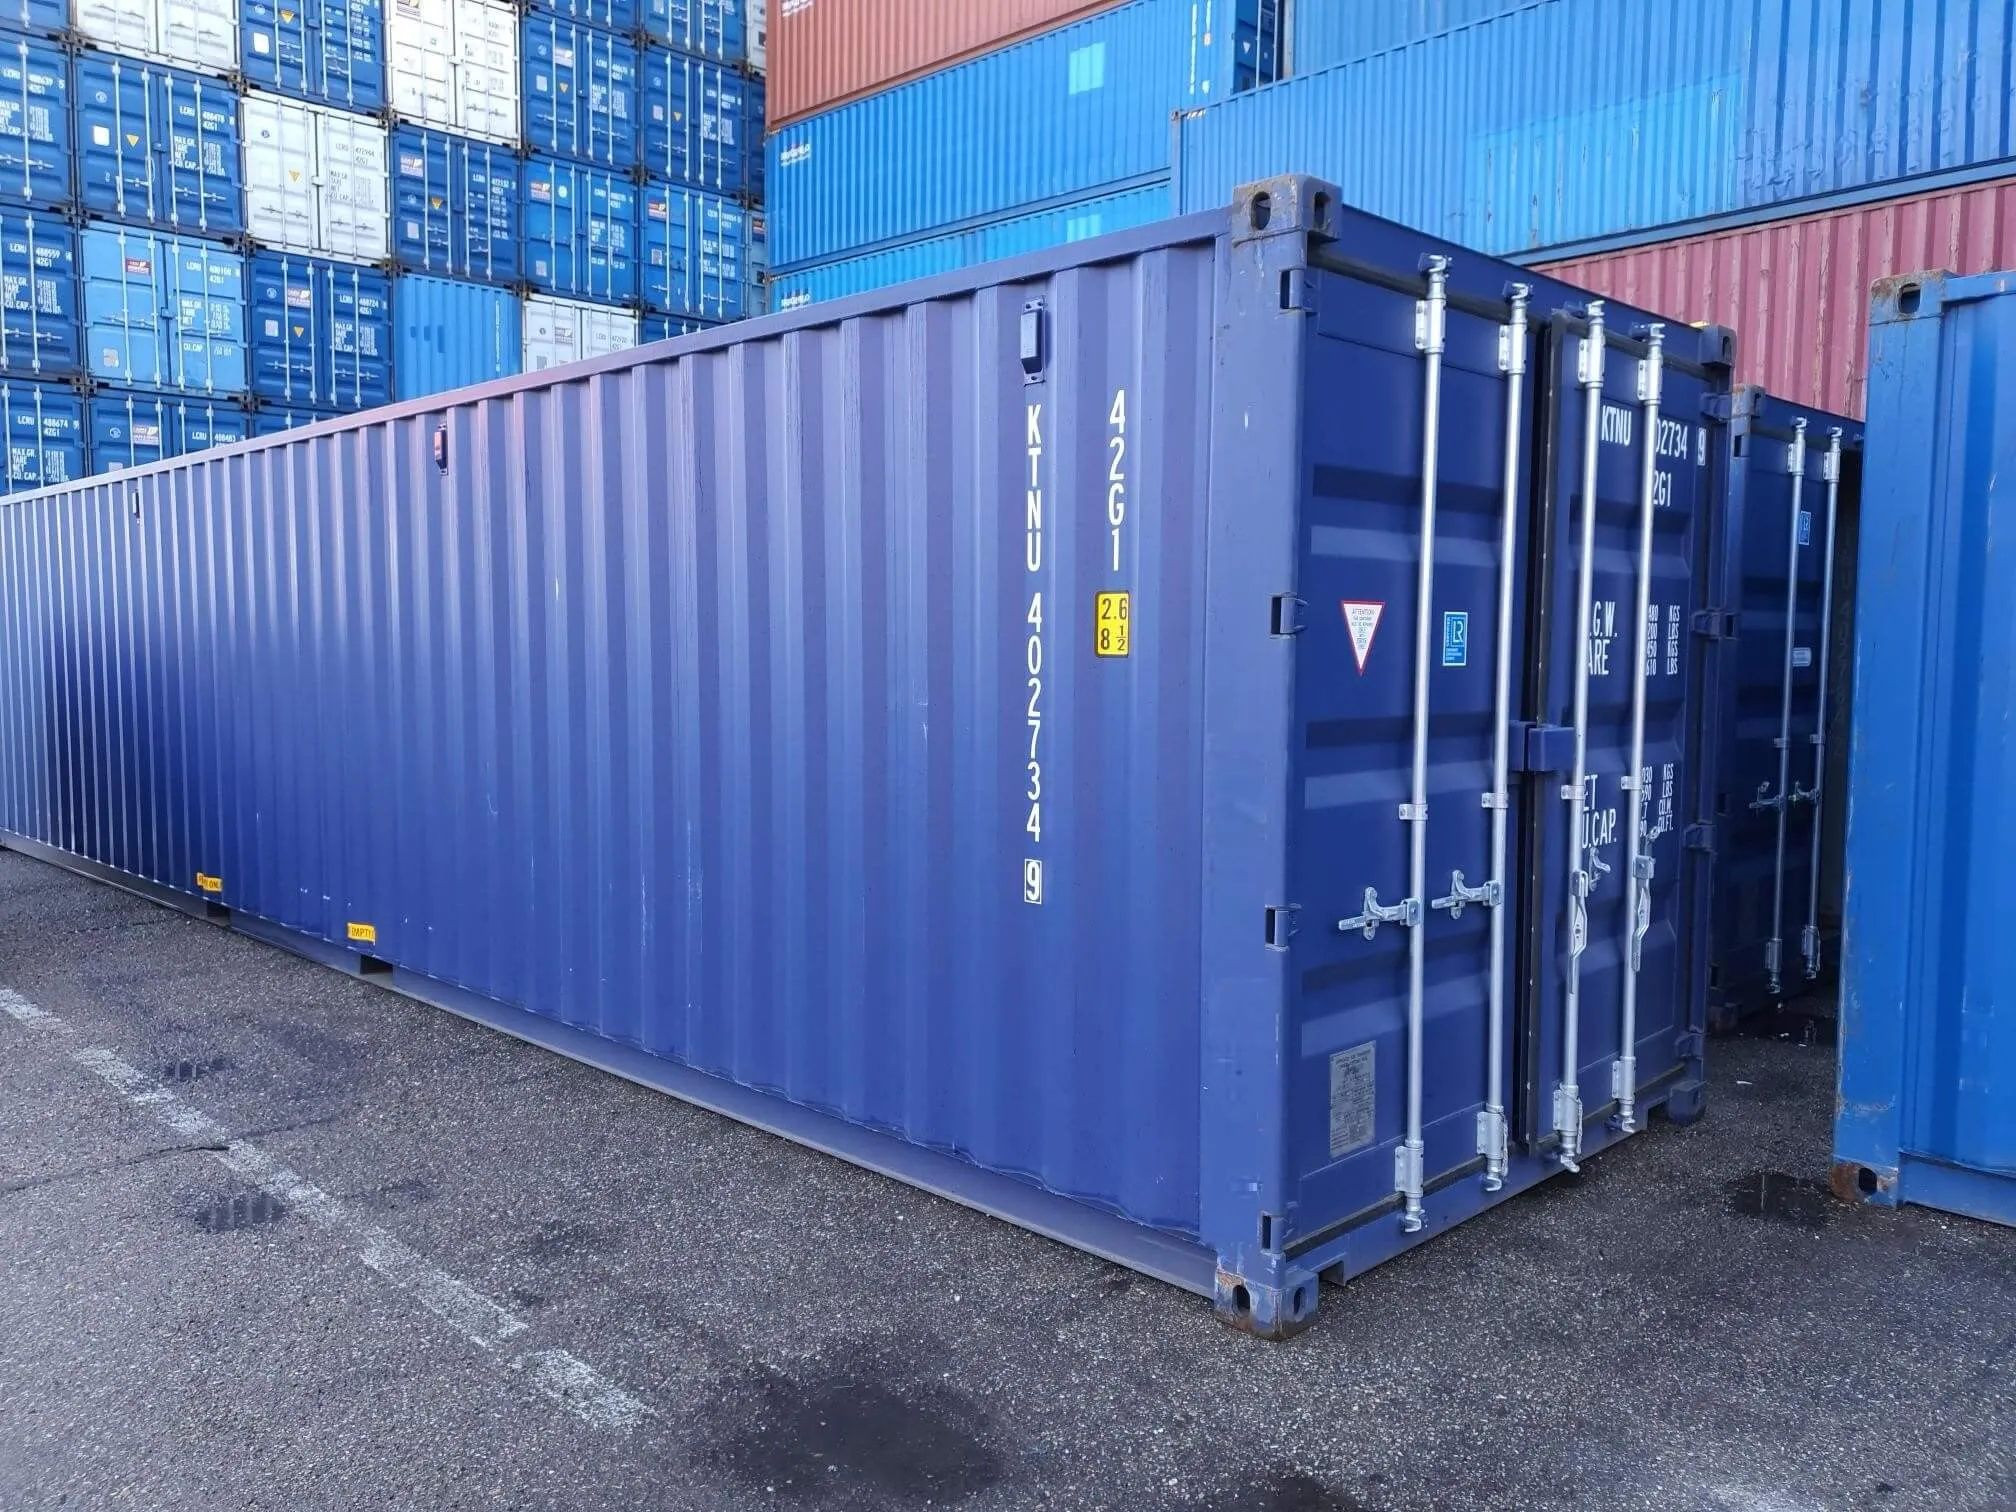 Standard Dry Containers from Sree Logistics